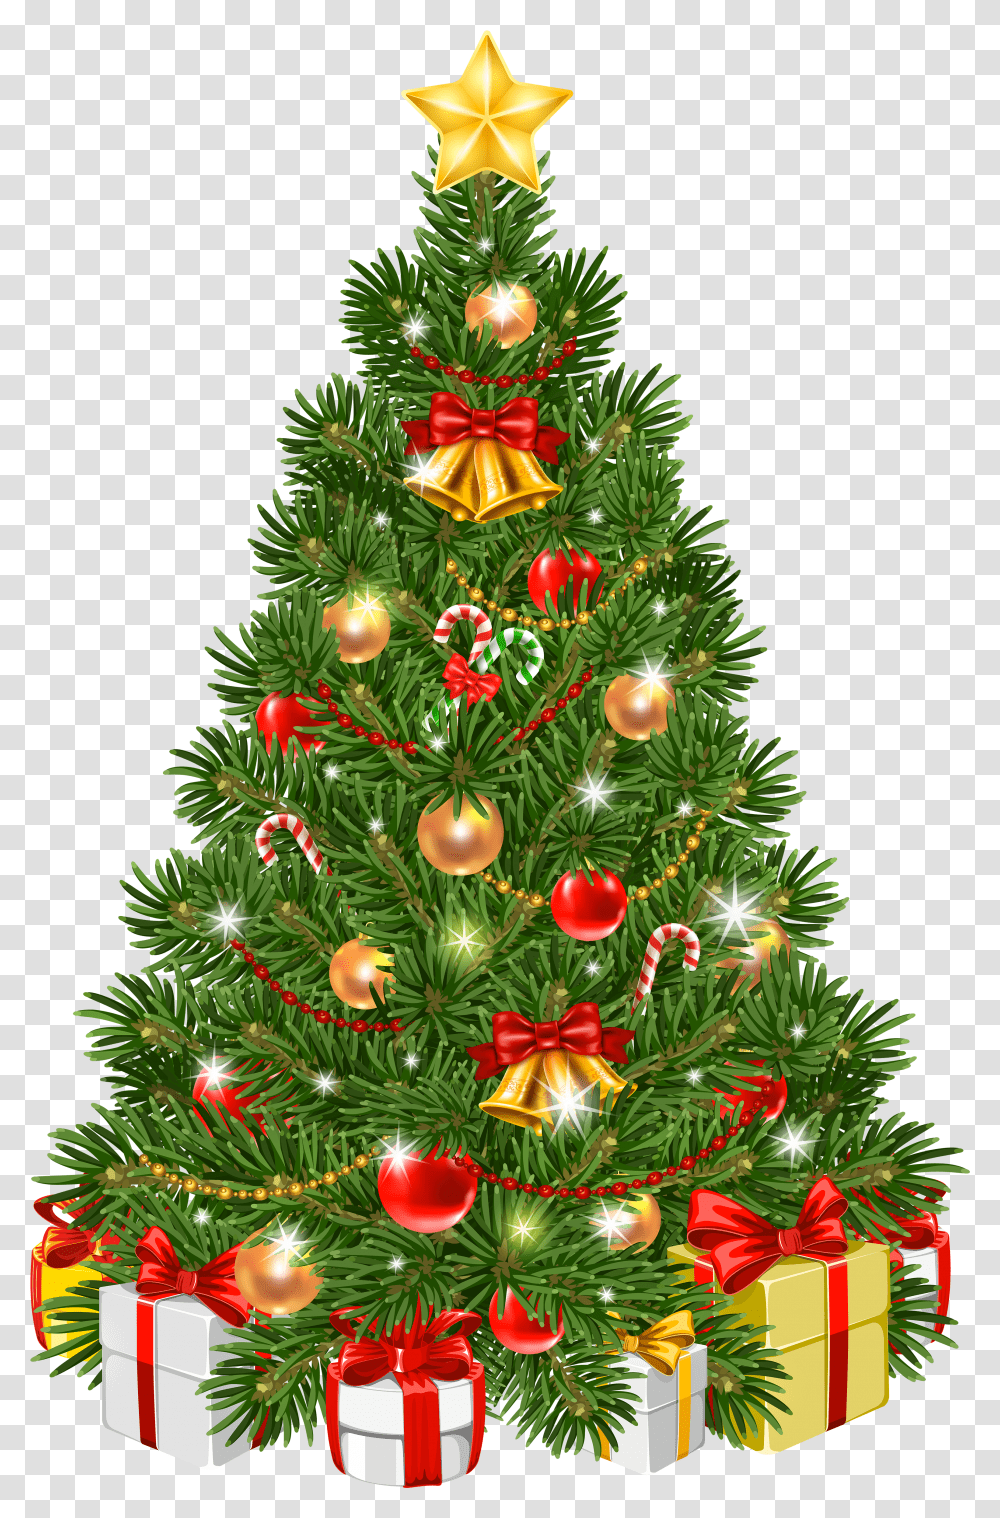 Decorated Christmas Tree Christmas Tree Clipart Transparent Png